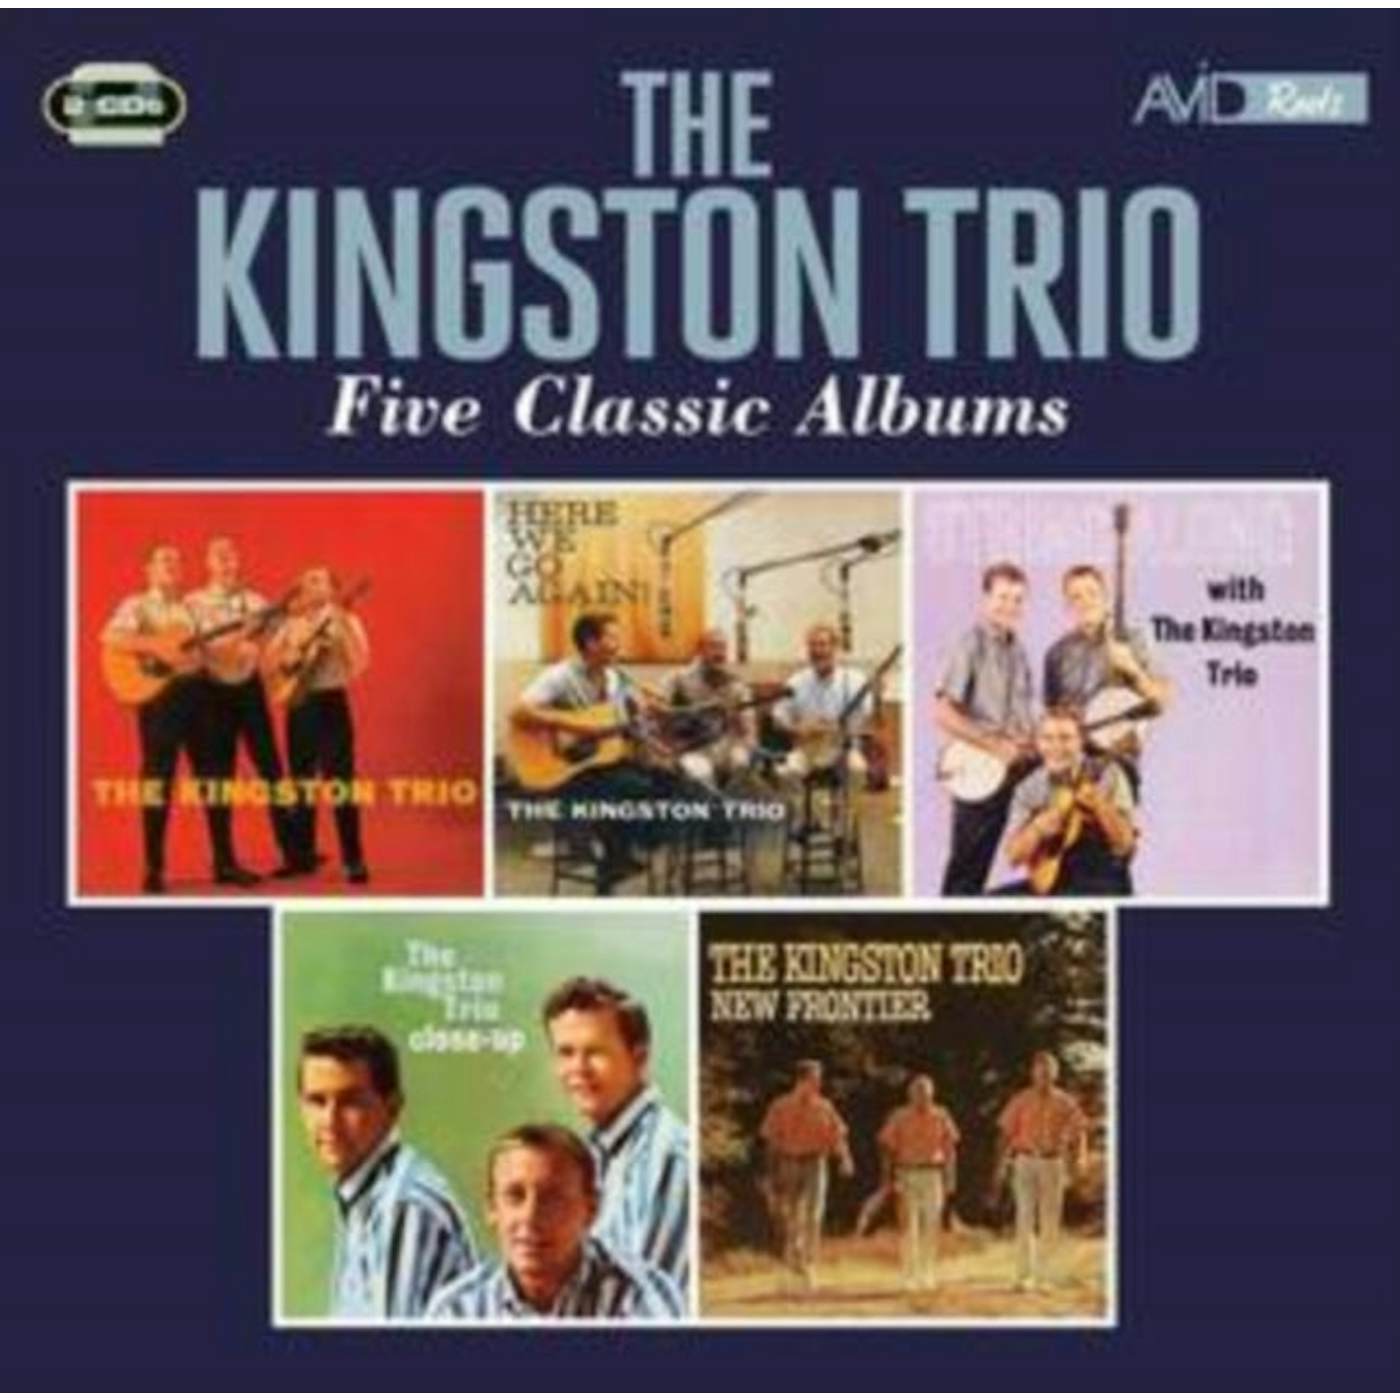 Kingston Trio CD - Five Classic Albums (The Kingston Trio / Here We Go Again / String Along / Close Up / New Frontier)